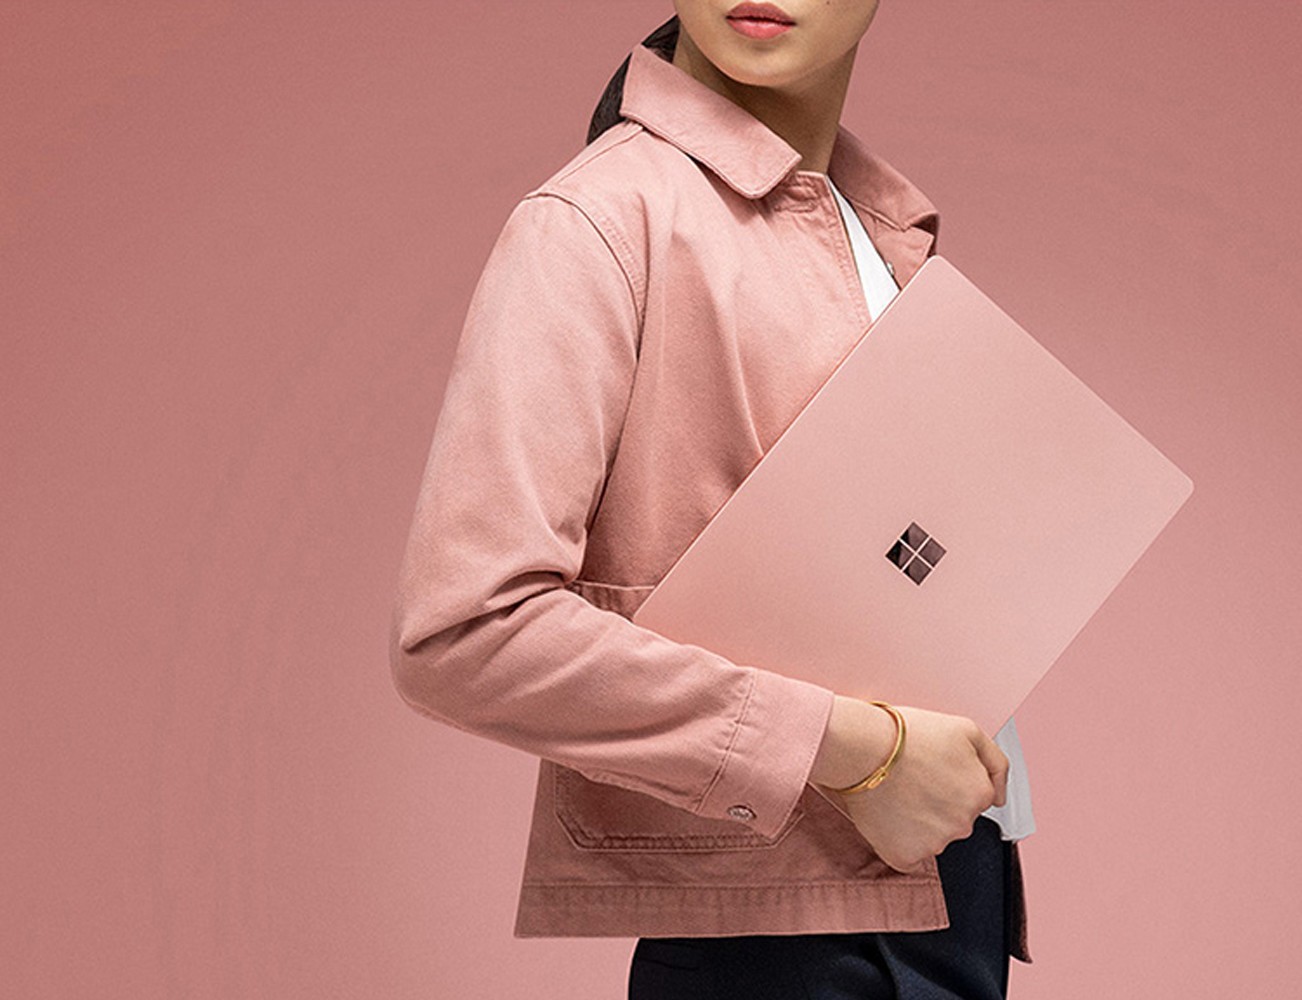 Pink Surface Laptop 2 debuts exclusively in China